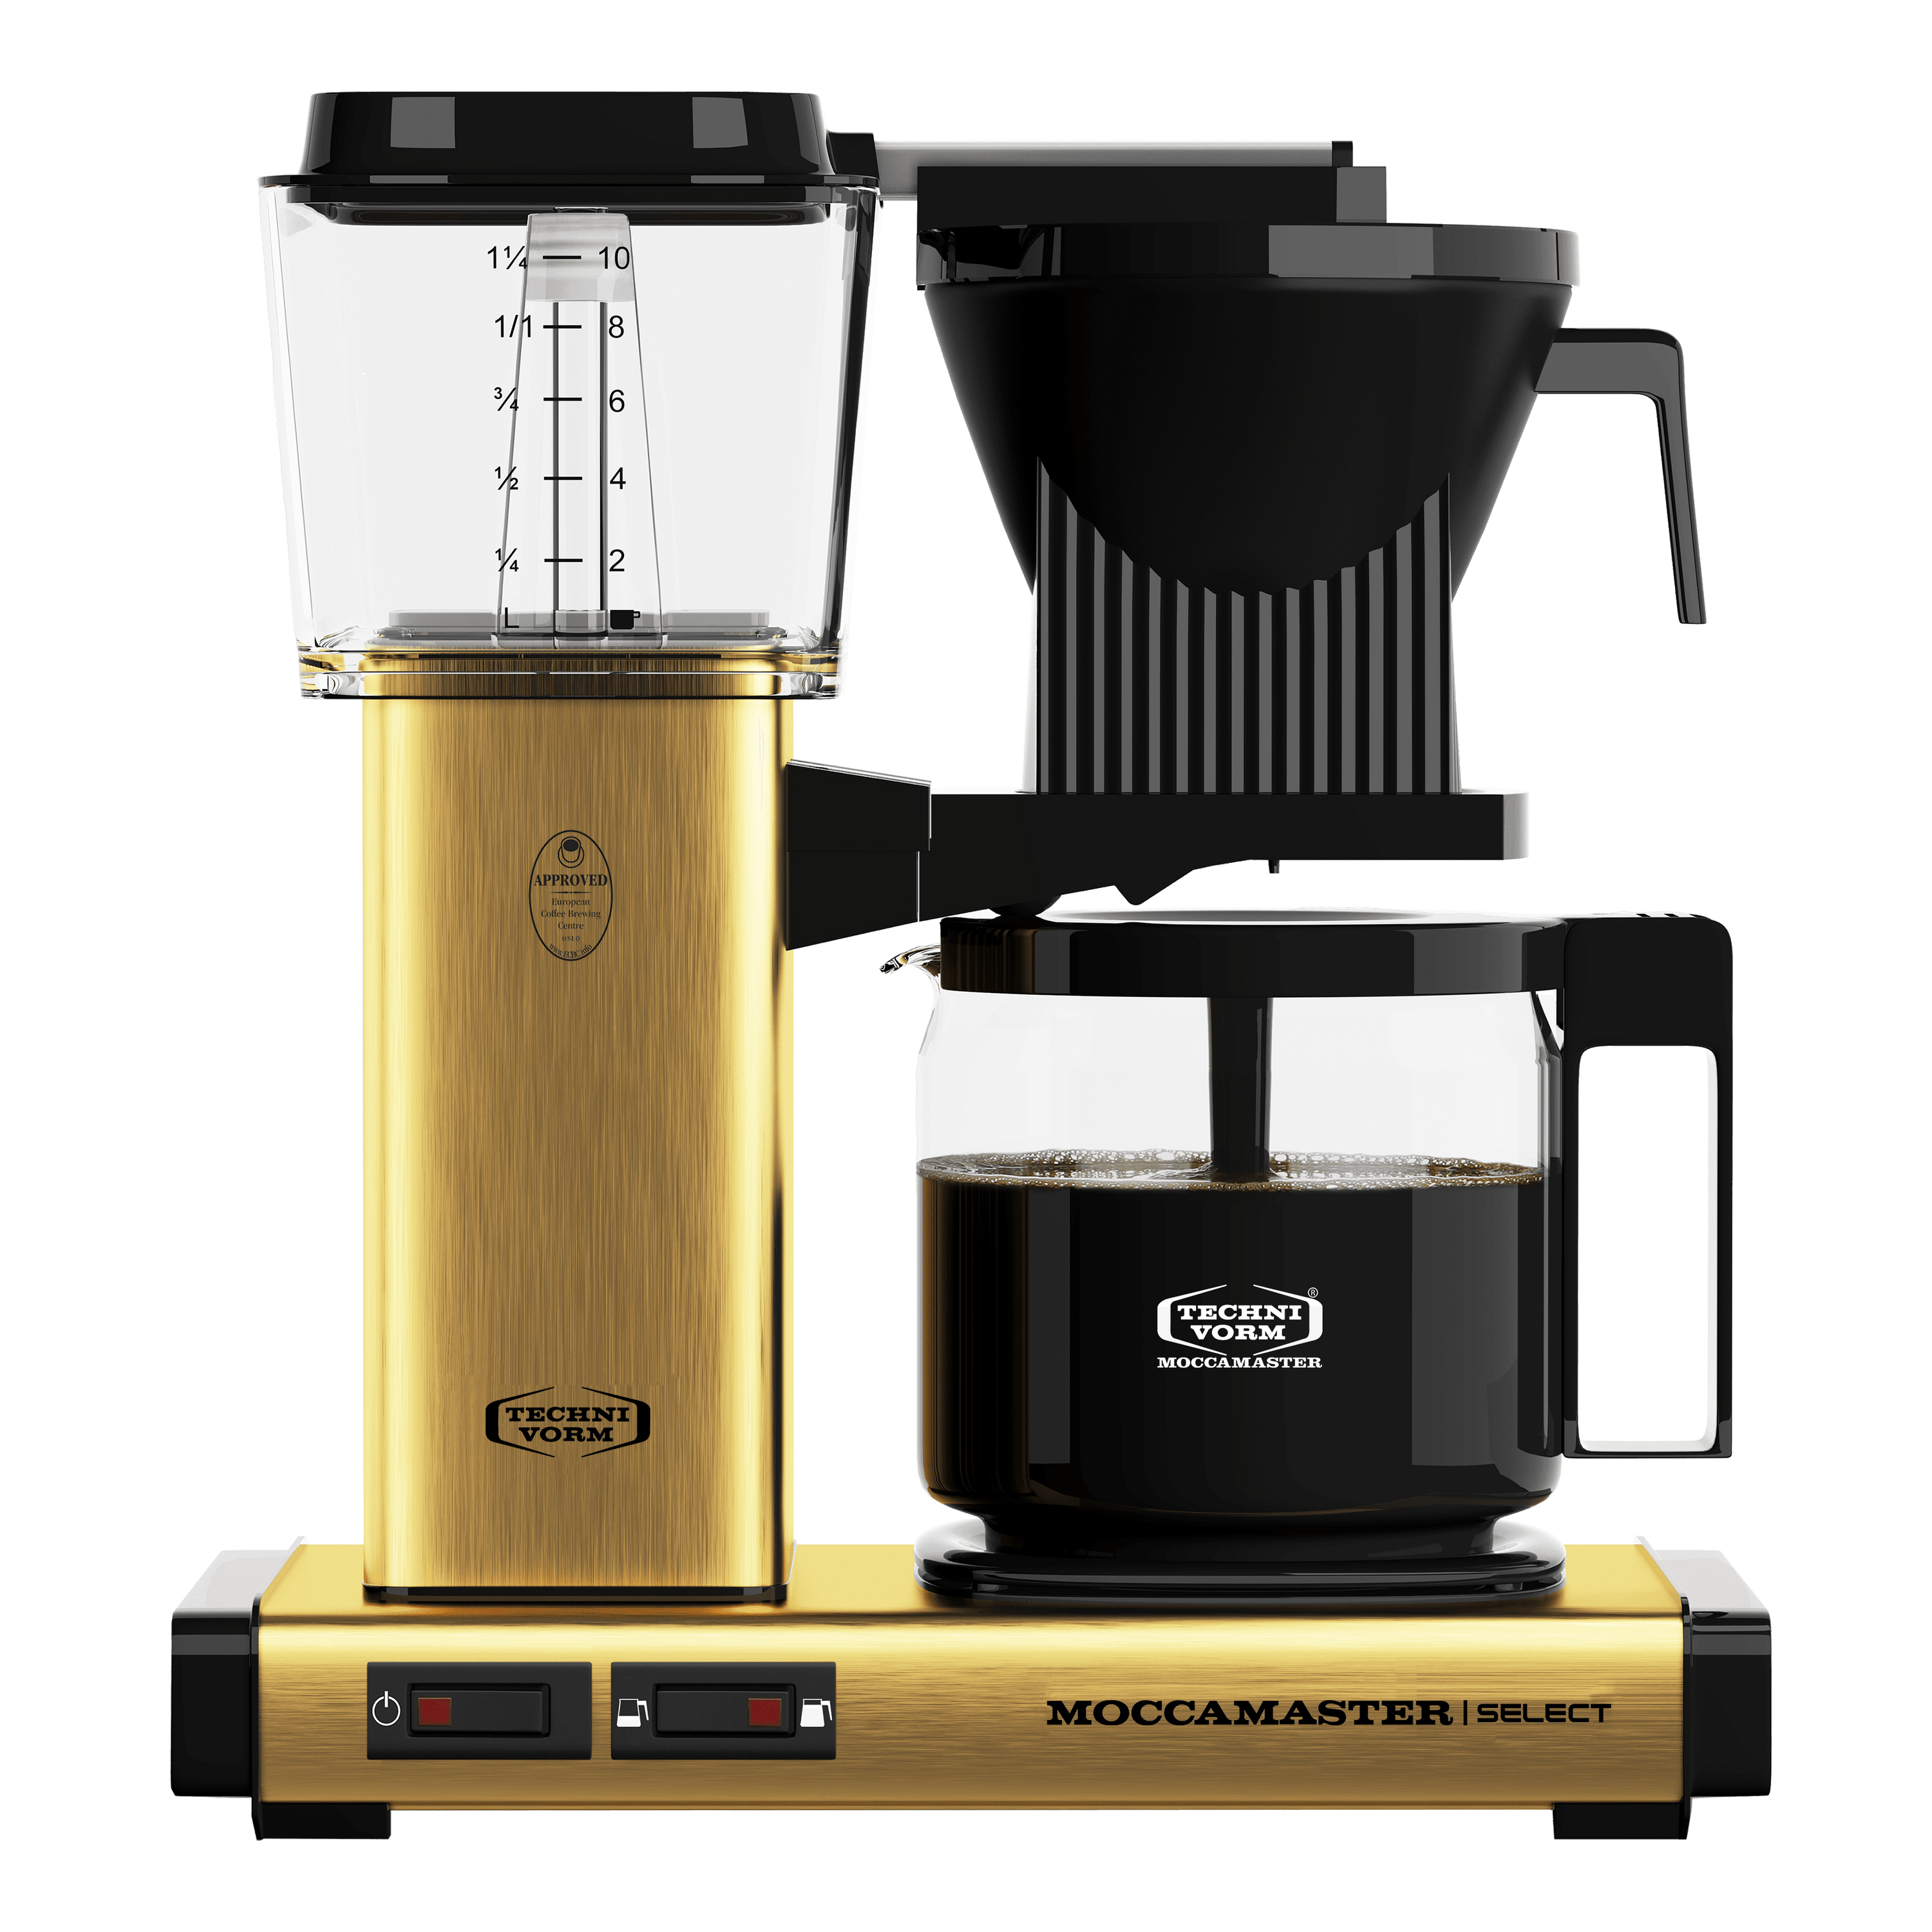 gold, brass, moccamaster kbg select coffee machine